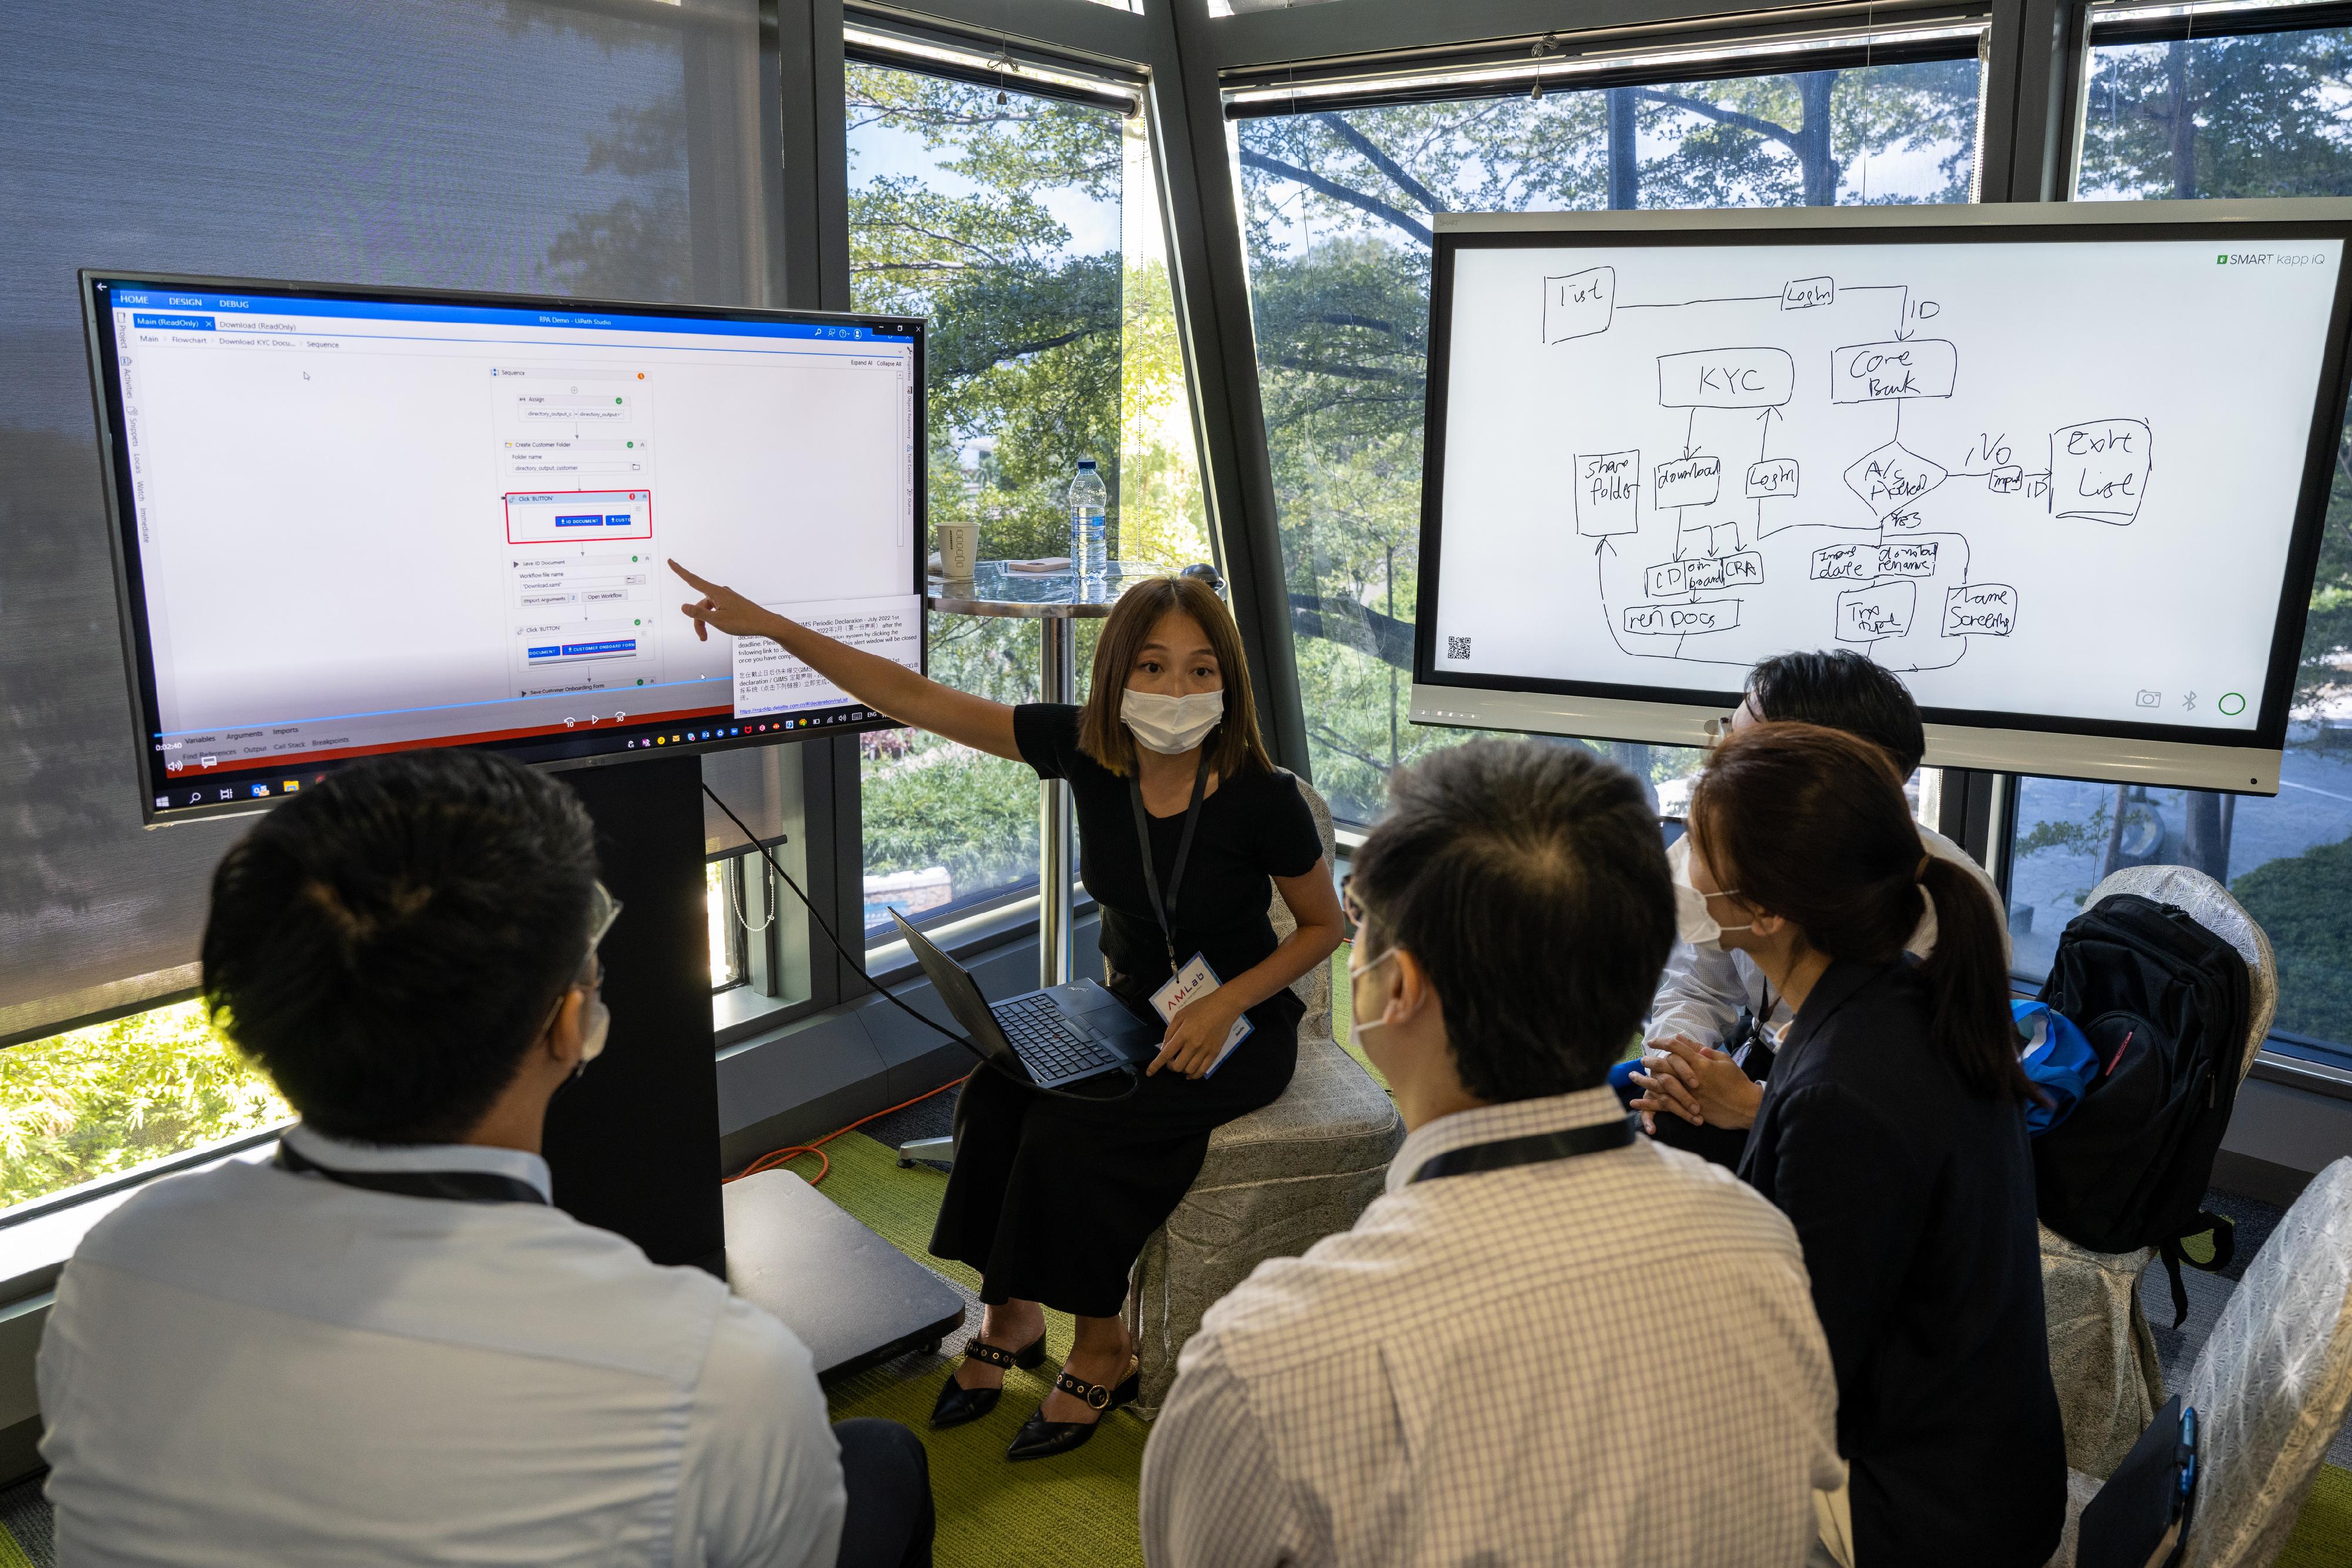 The Hong Kong Monetary Authority and Cyberport, supported by Deloitte, co-organised today (July 21) the second Anti-Money Laundering Regtech Lab. Photo shows participating banks collaborating with technical experts to gain hands-on experience with "enabling technologies" and explore potential use cases.